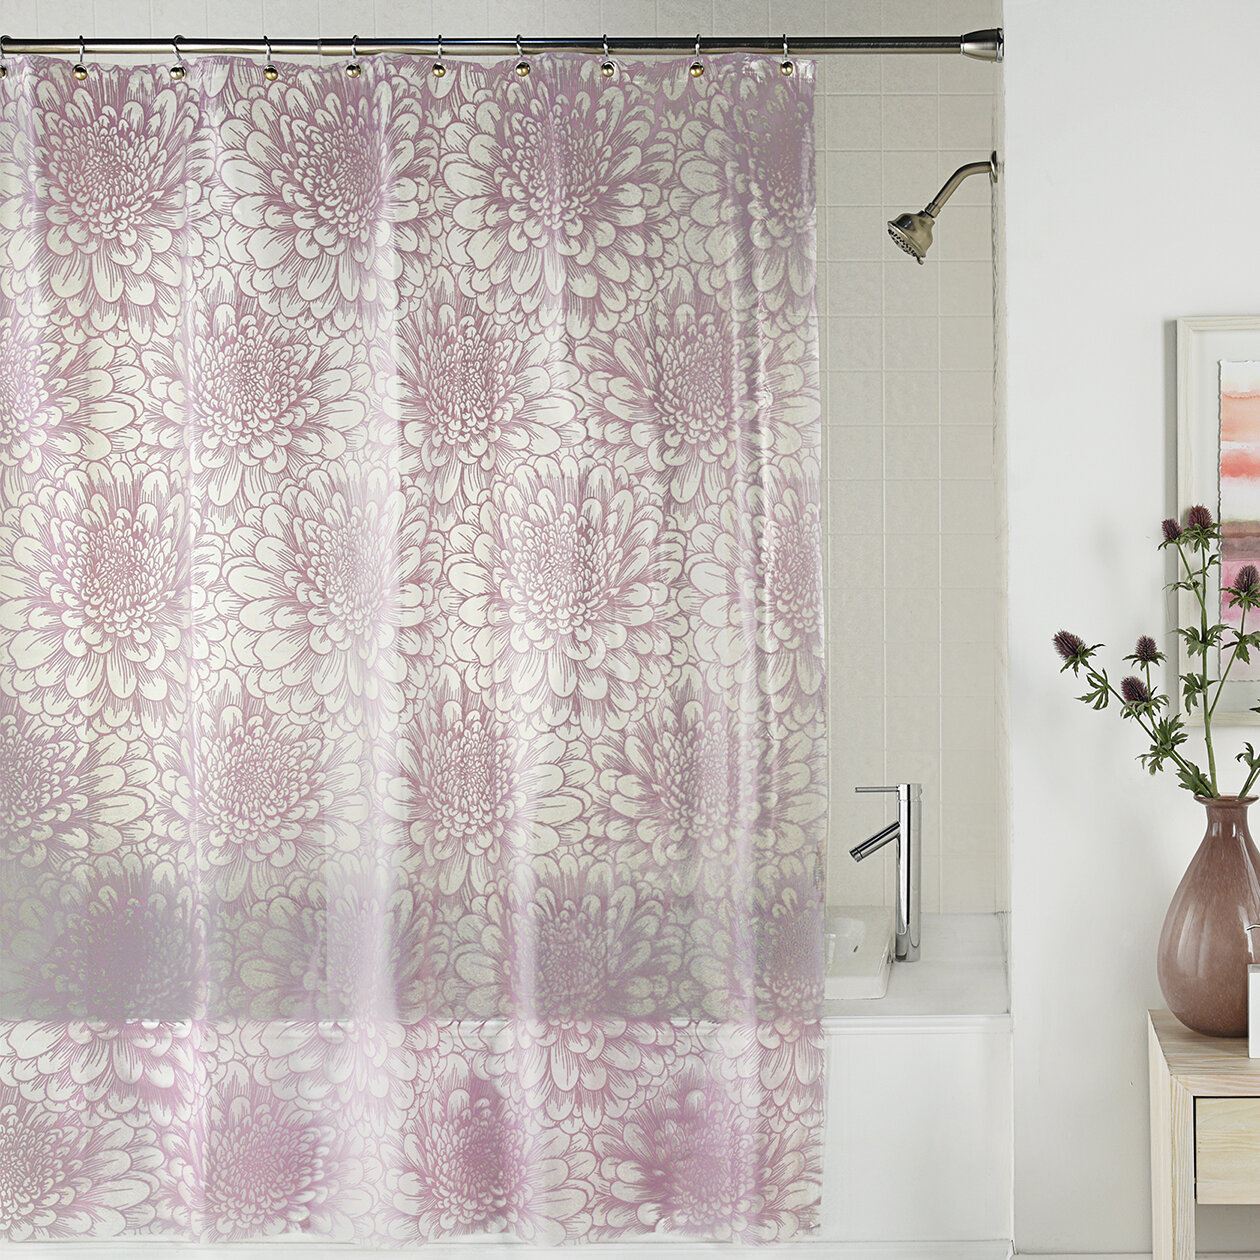 plastic shower curtains with leaves